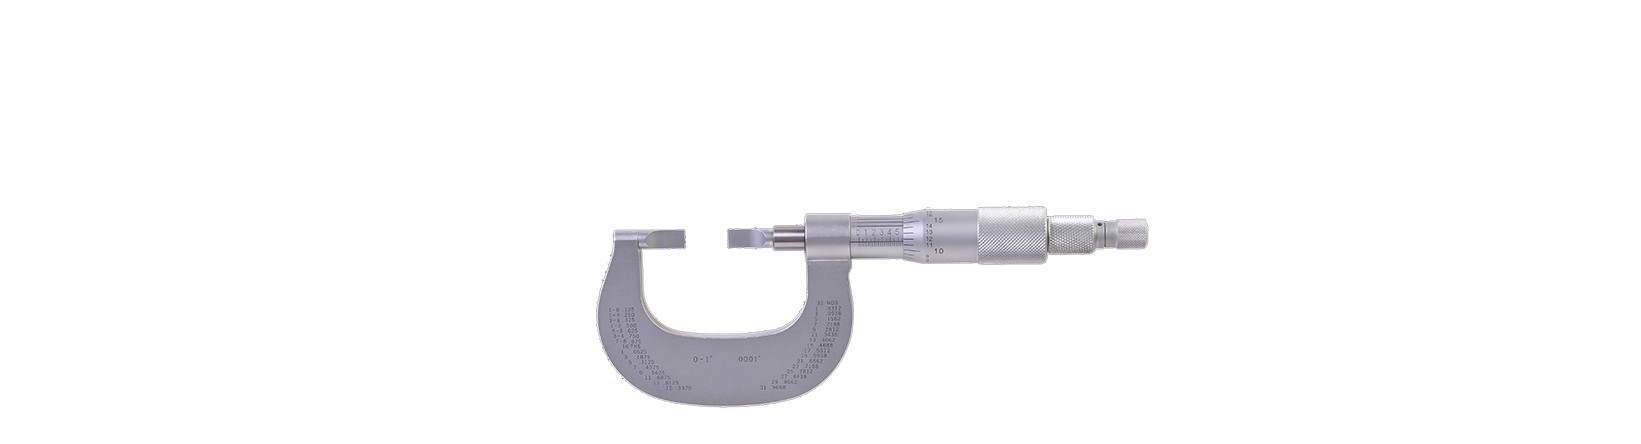 A picture of an image with the text " manufacturing and precision series ".